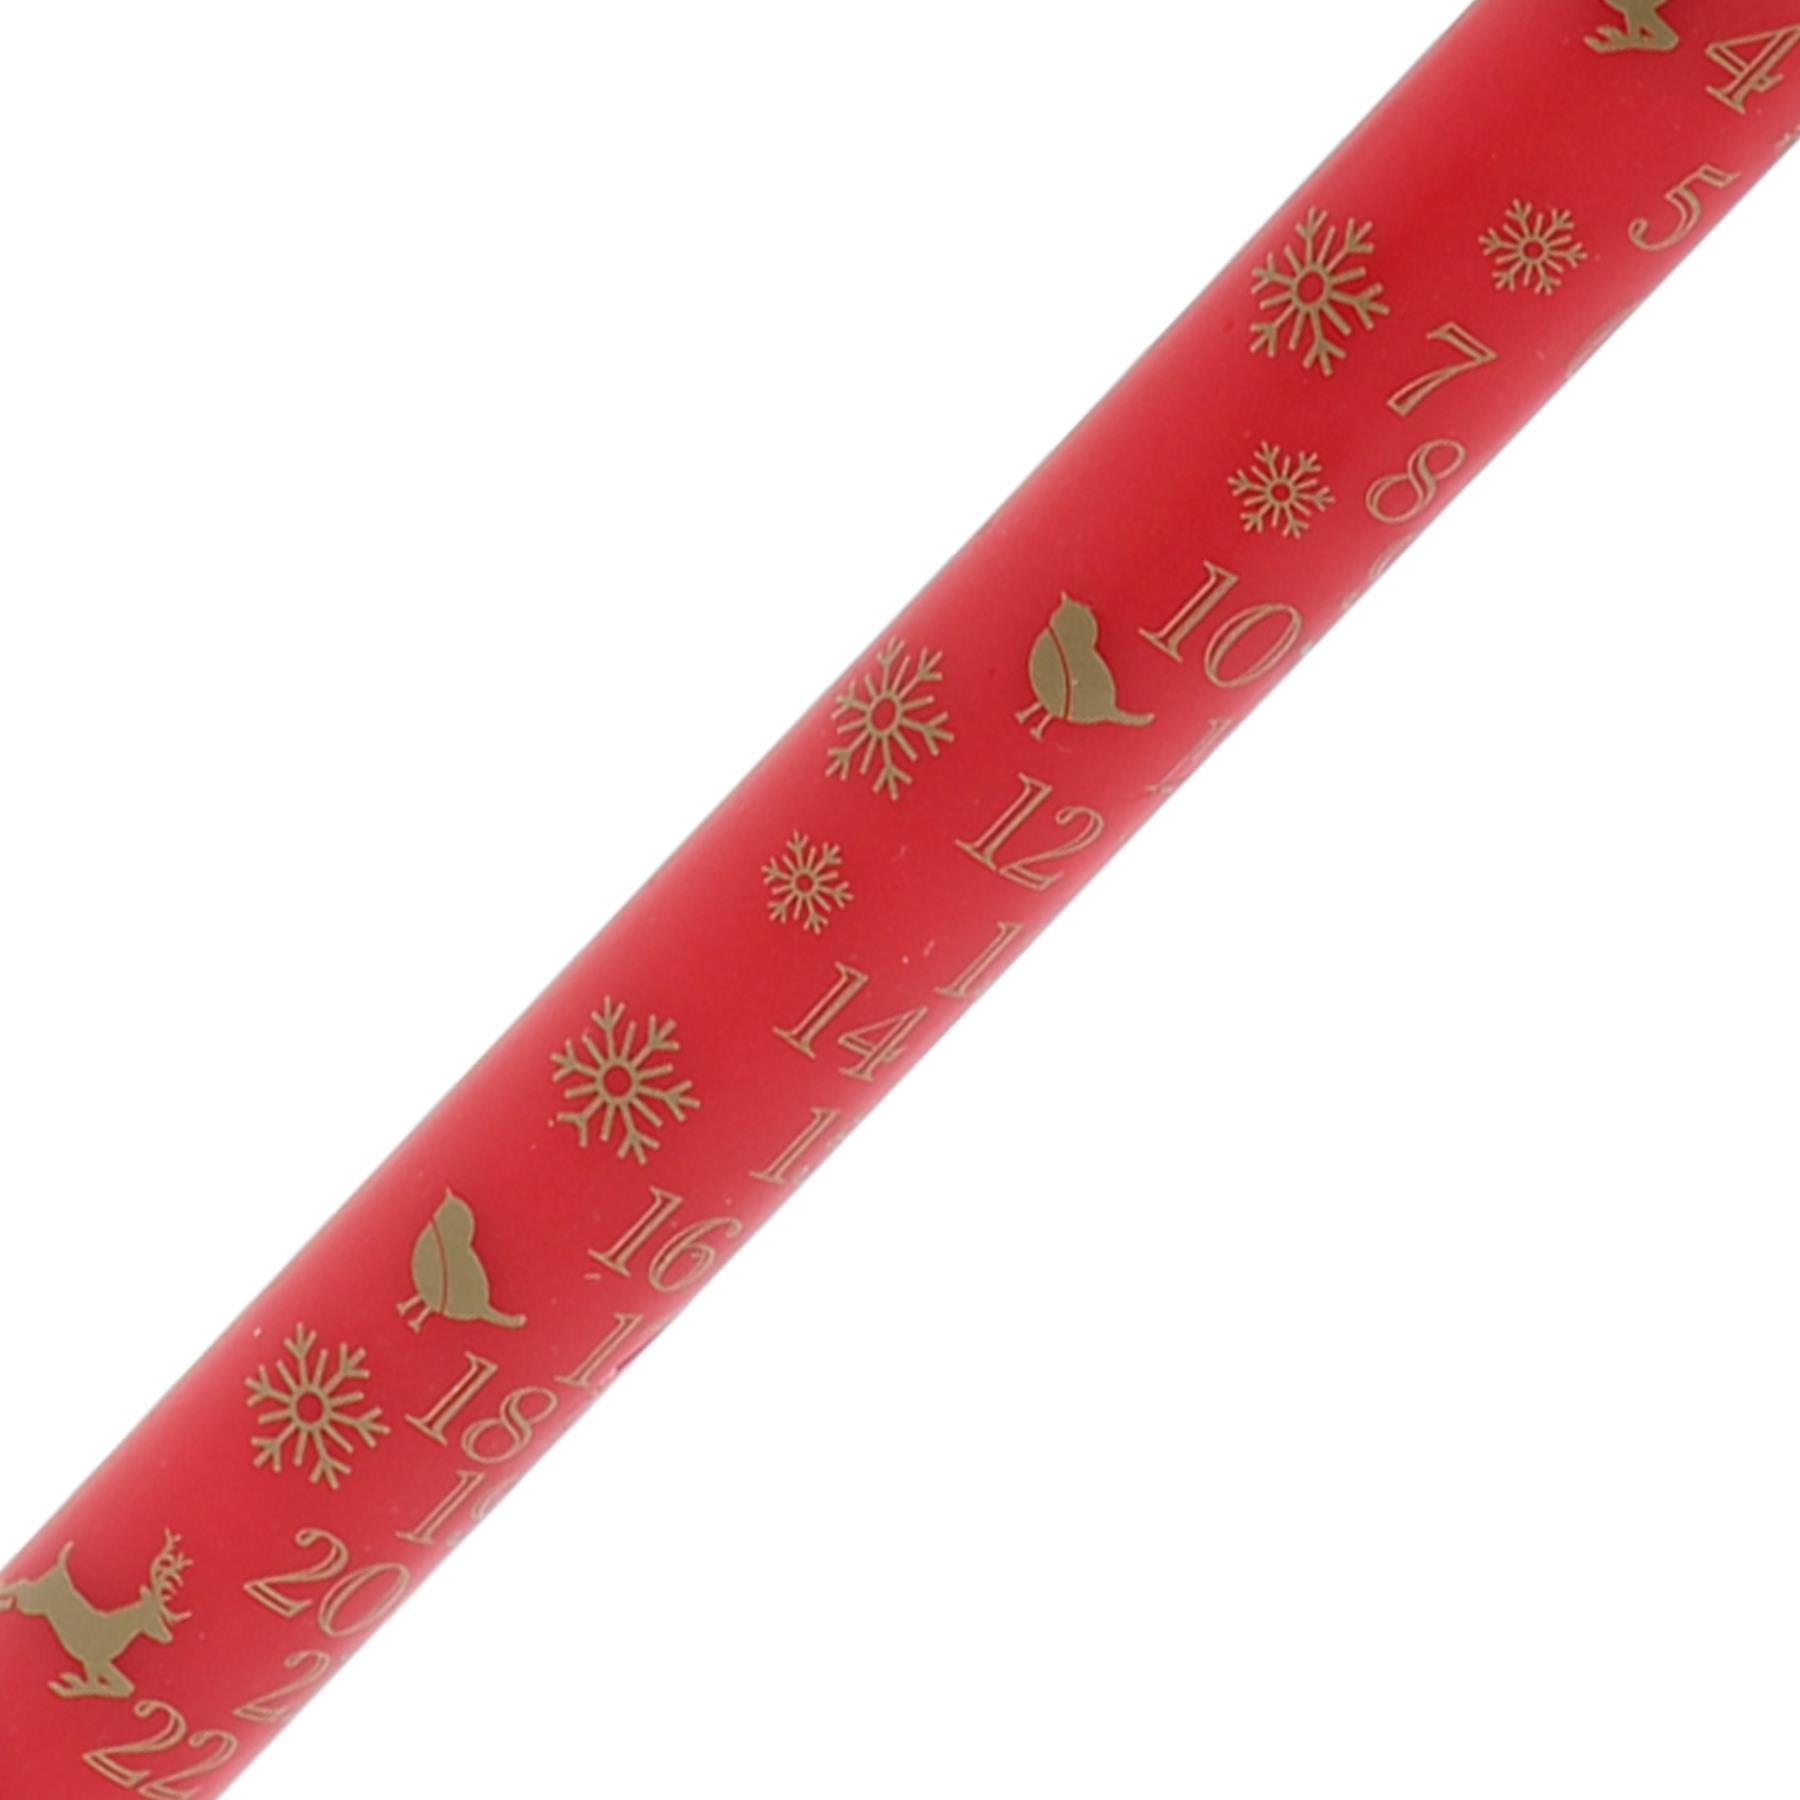 25cm Wax Advent Candle Christmas Countdown with Festive Images - Red